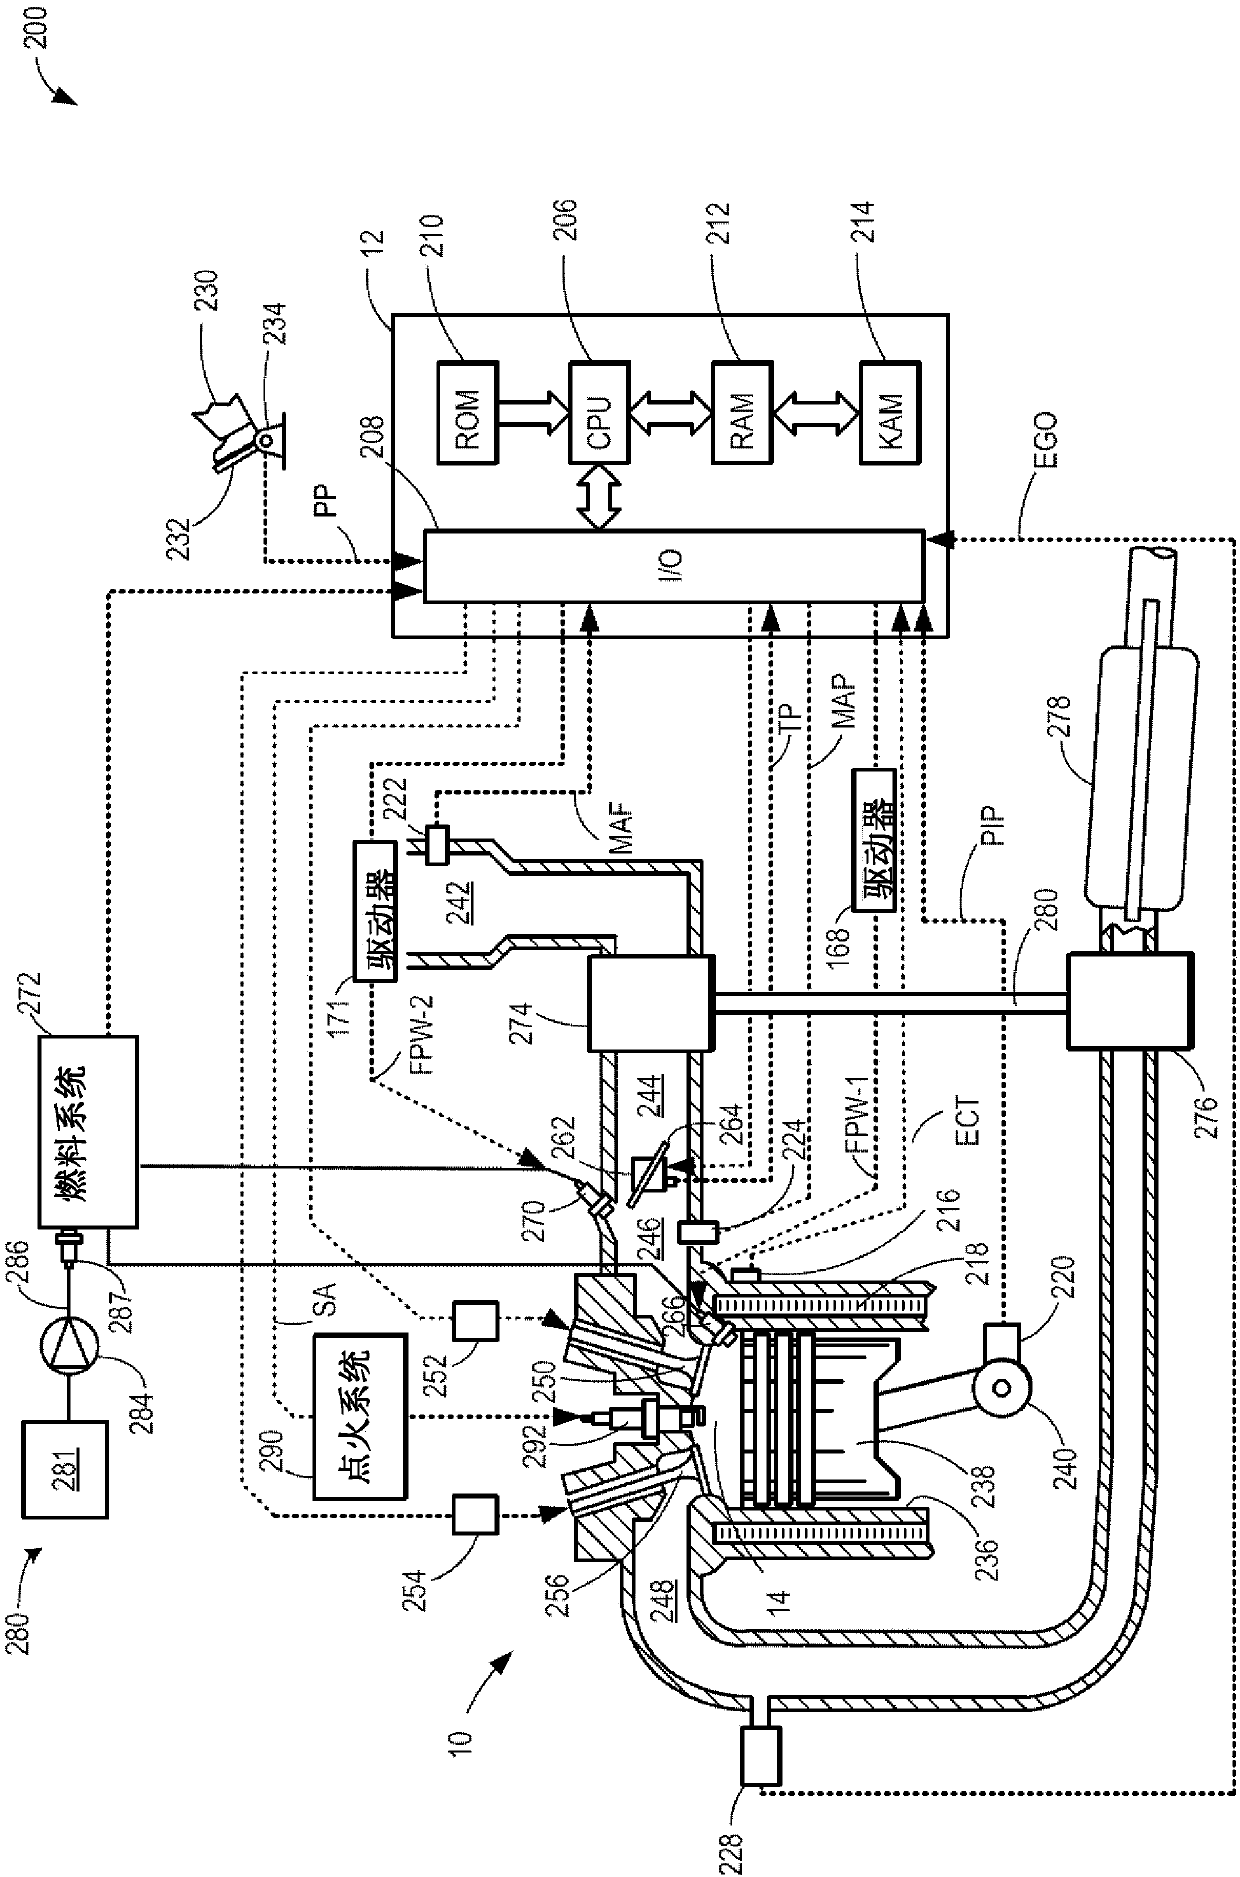 Methods and systems for hybrid vehicle power delivery